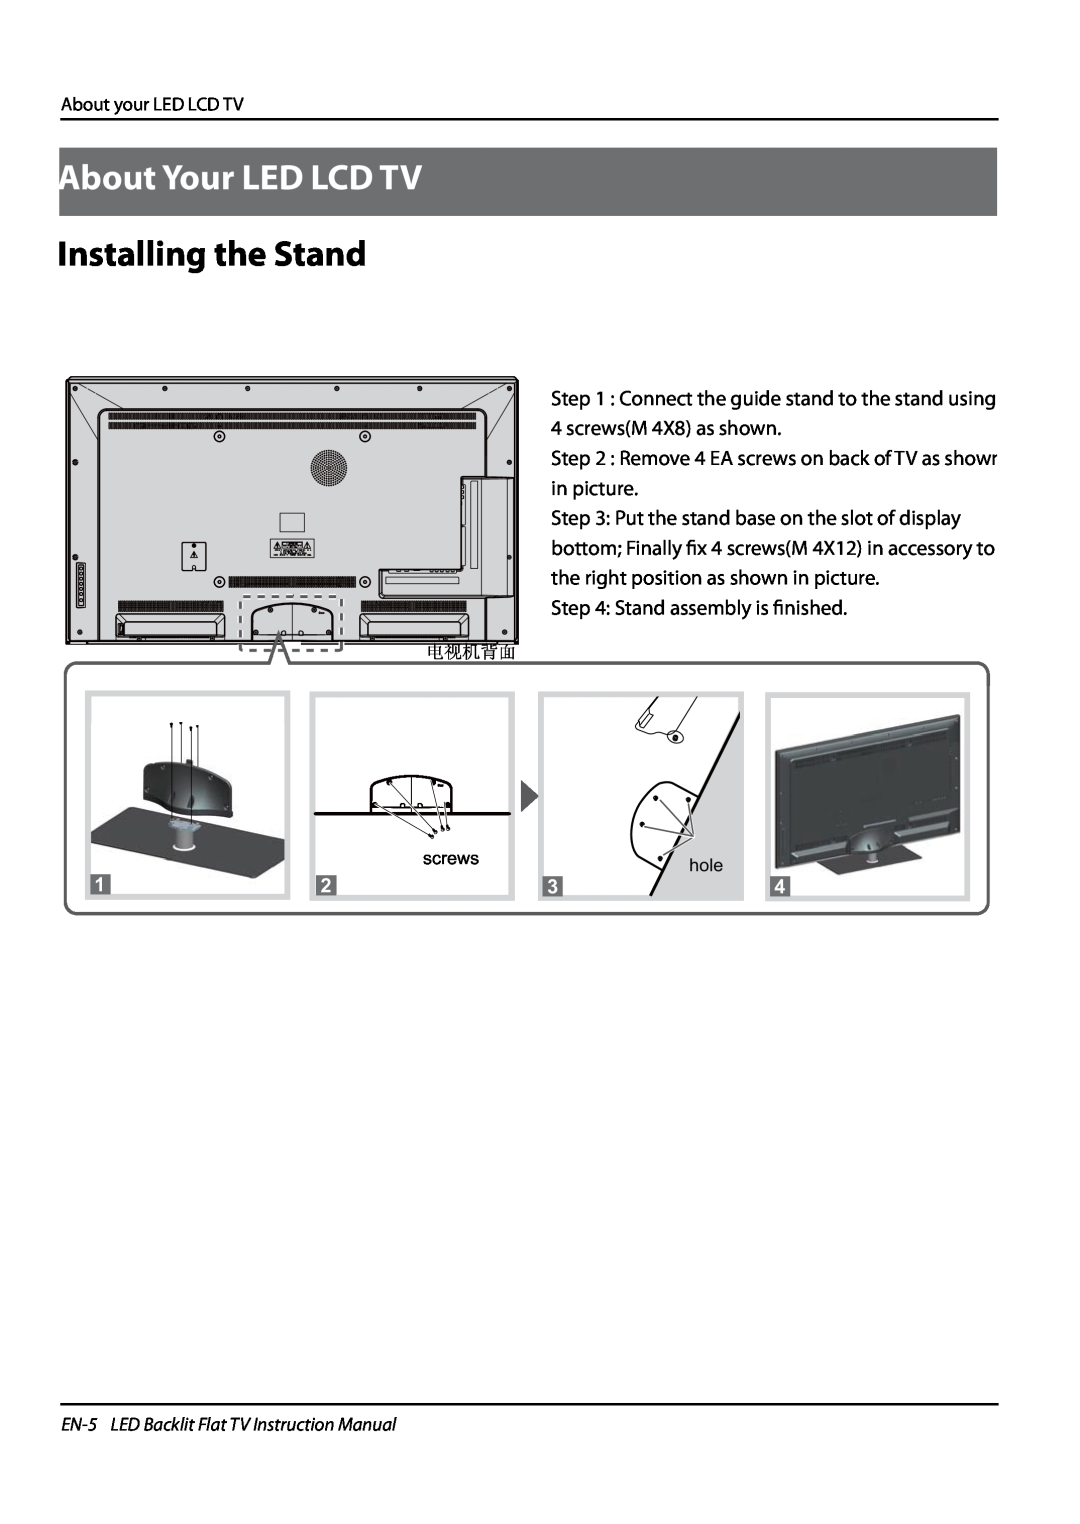 Haier LE47H5000, LE55H5000, LE42H5000 manual About Your LED LCD TV, Installing the Stand 